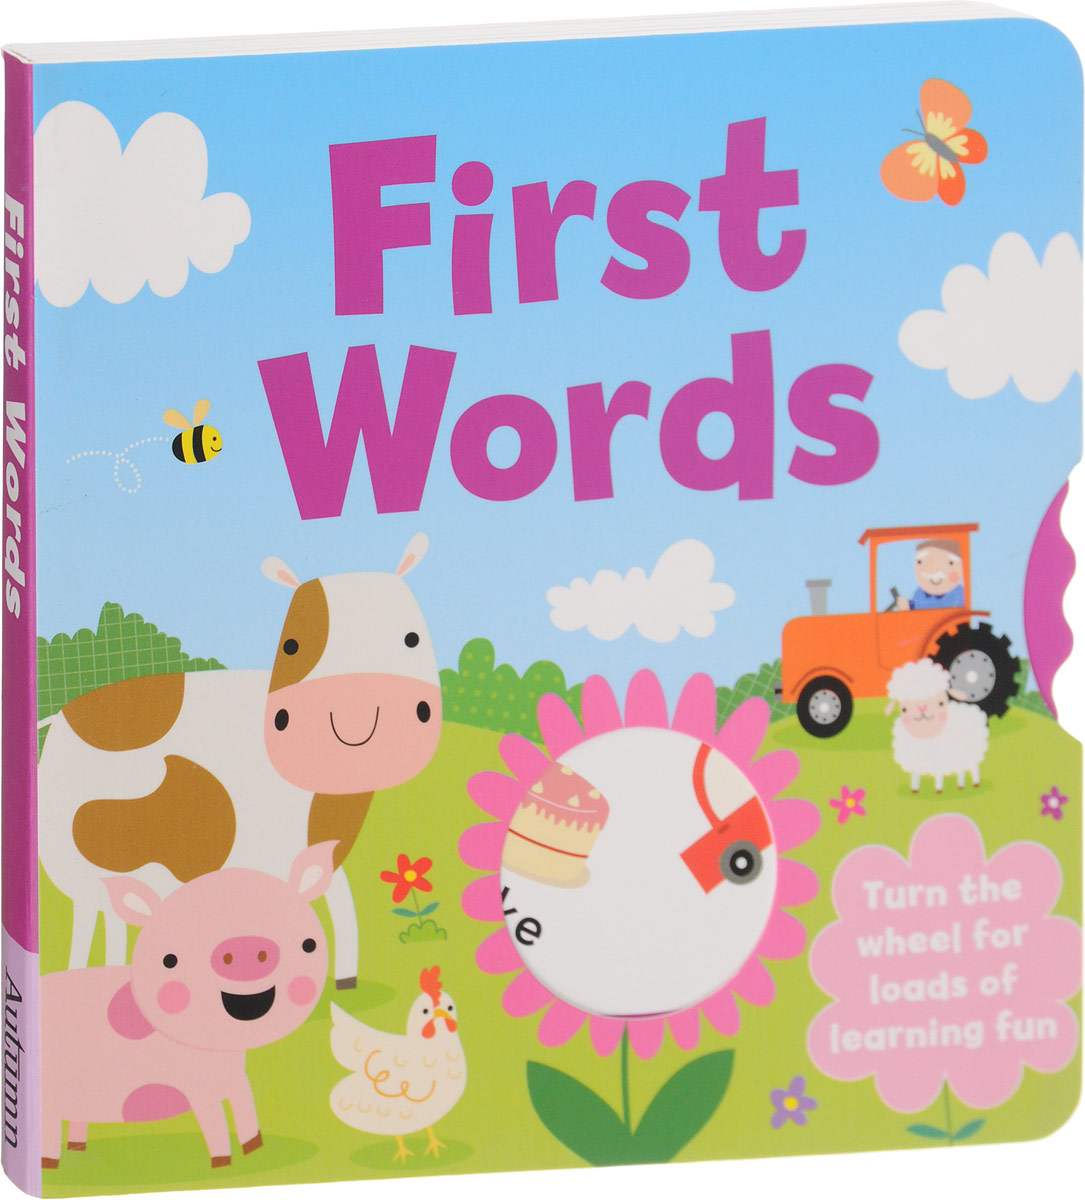 Year book words. My first Words. First Words book. First Words Ранок. My first Words купить.